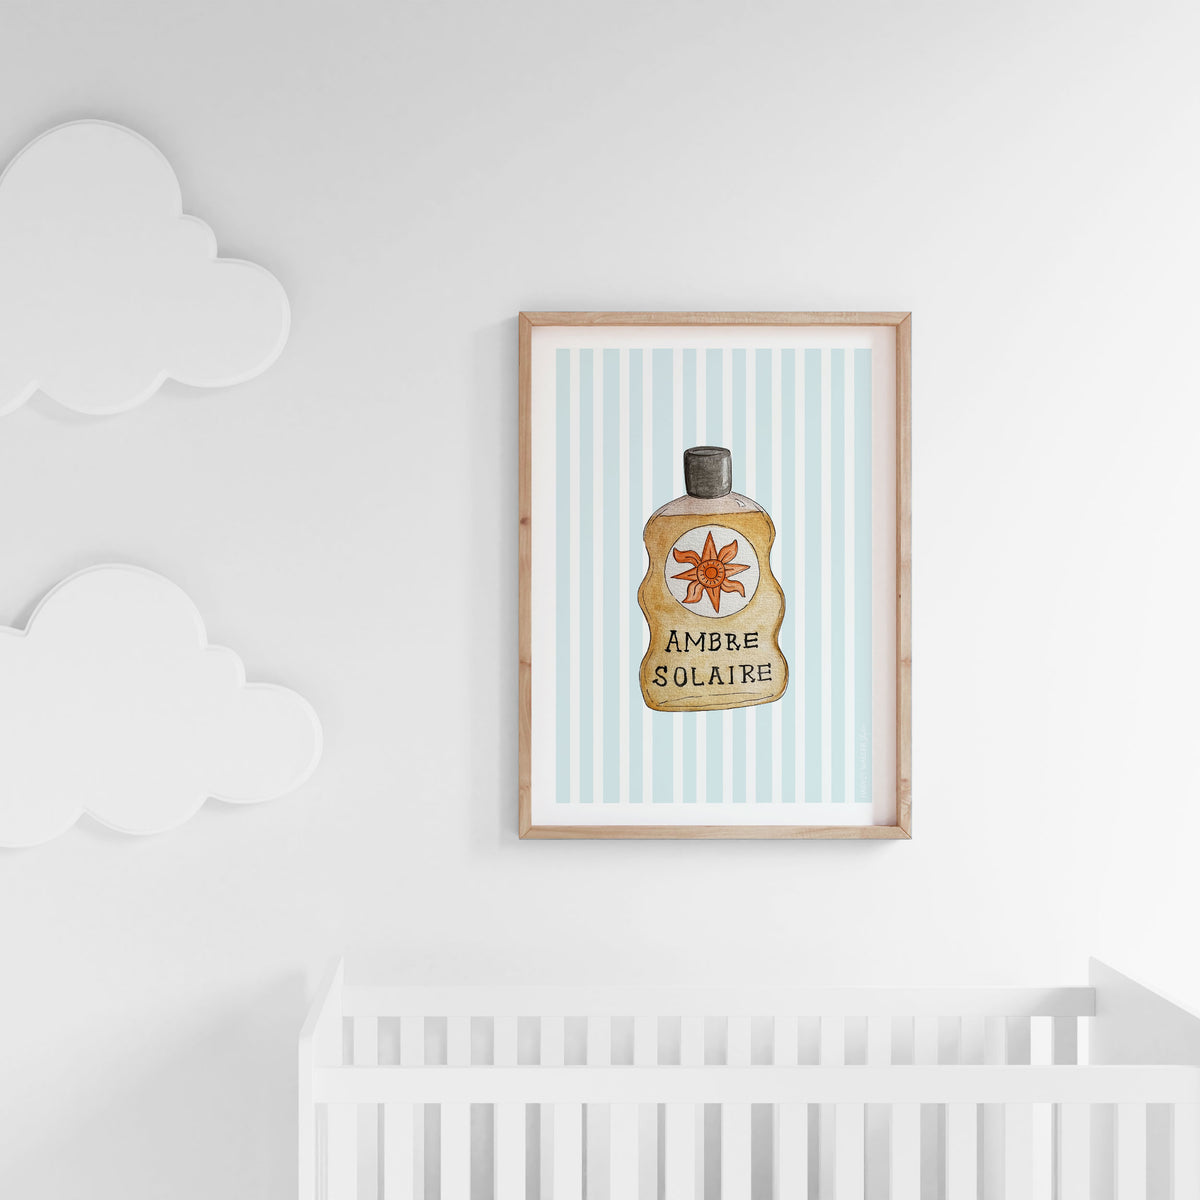 Modern coastal print of vintage sunscreen bottle, with blue and white stripe pattern behind. Tan and blue colourway. Displayed in modern coastal baby&#39;s room